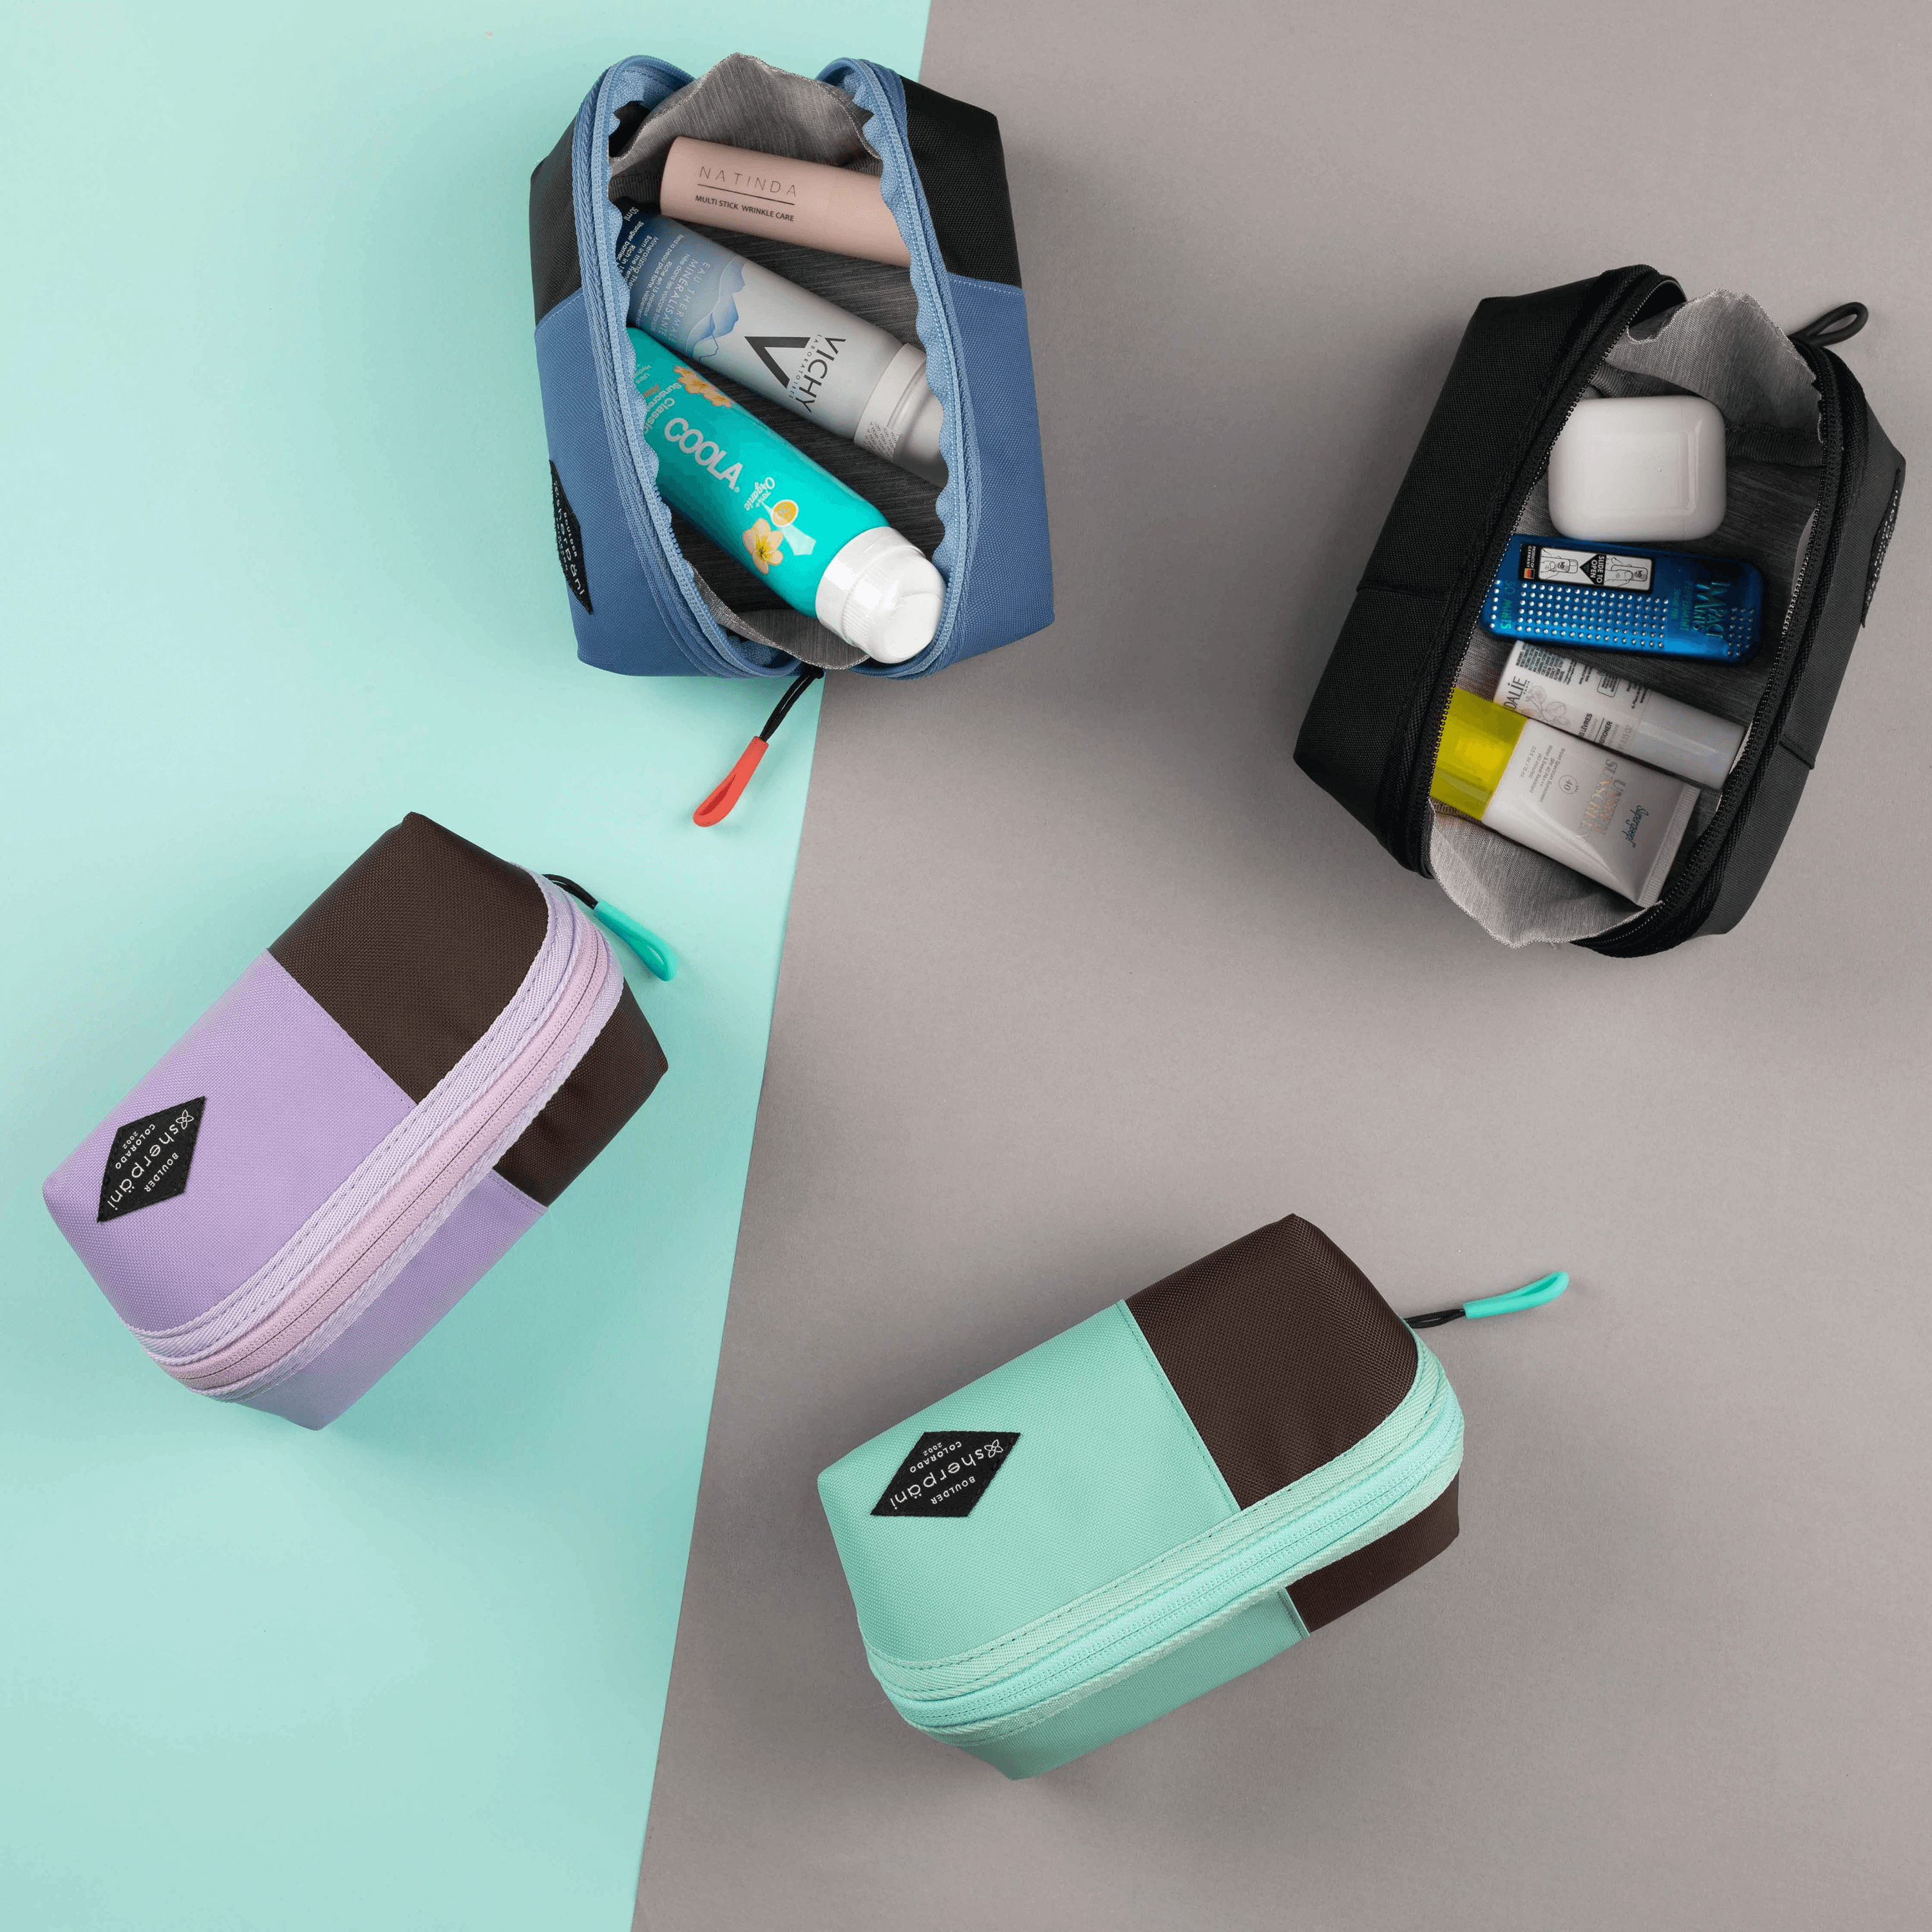 Top view of four Sherpani Harmony travel accessories on a gray and green background. One is Pacific Blue, one is Raven, one is Lavender and one is Seagreen. Two of the pouches are open and full of example items, two of the pouches are closed.